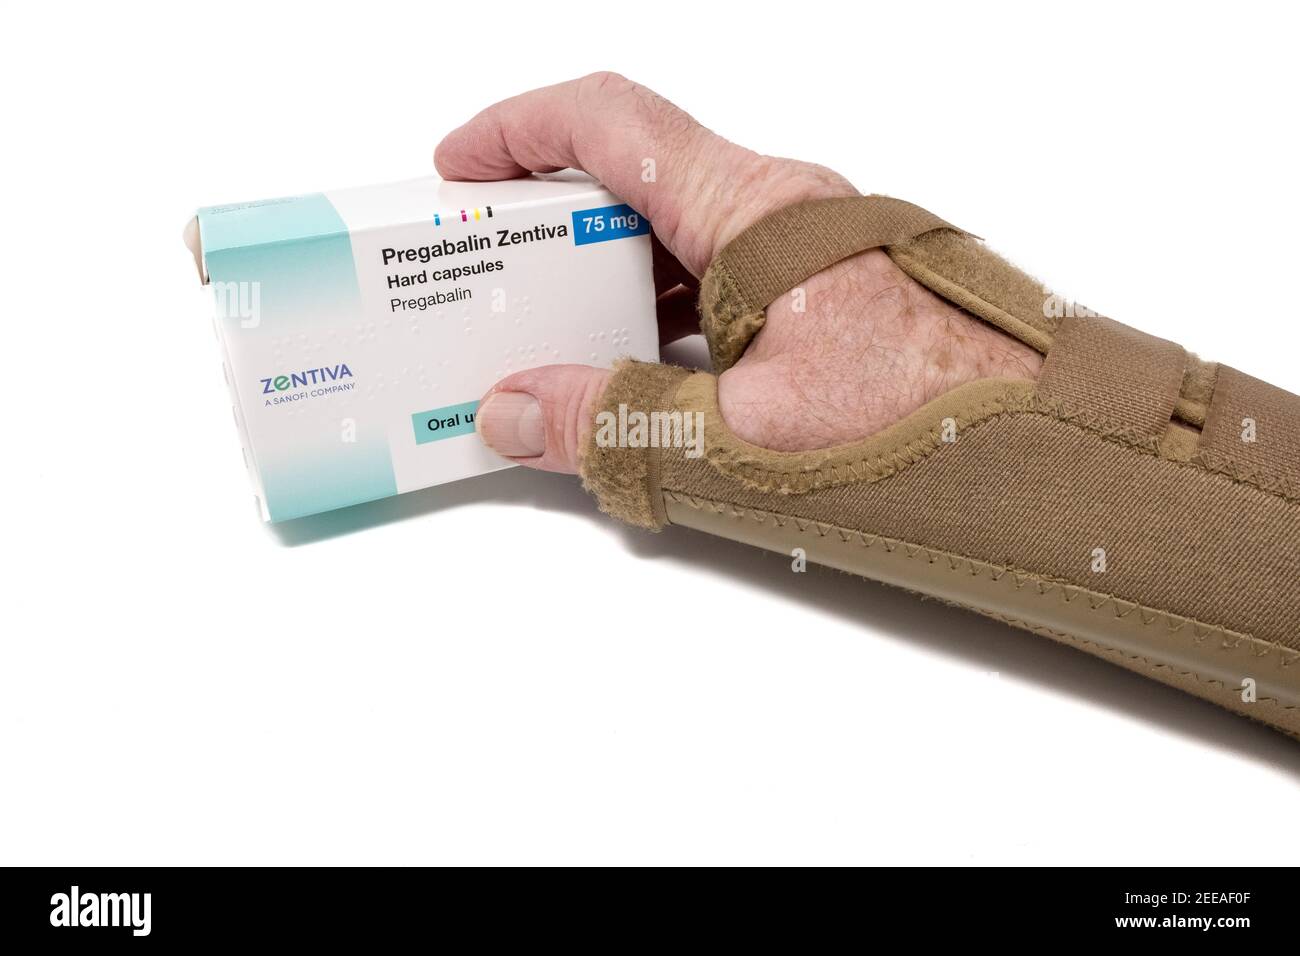 Scaphoid fracture support on mans arm holding box of tablets of Pregabalin for nerve pain Stock Photo